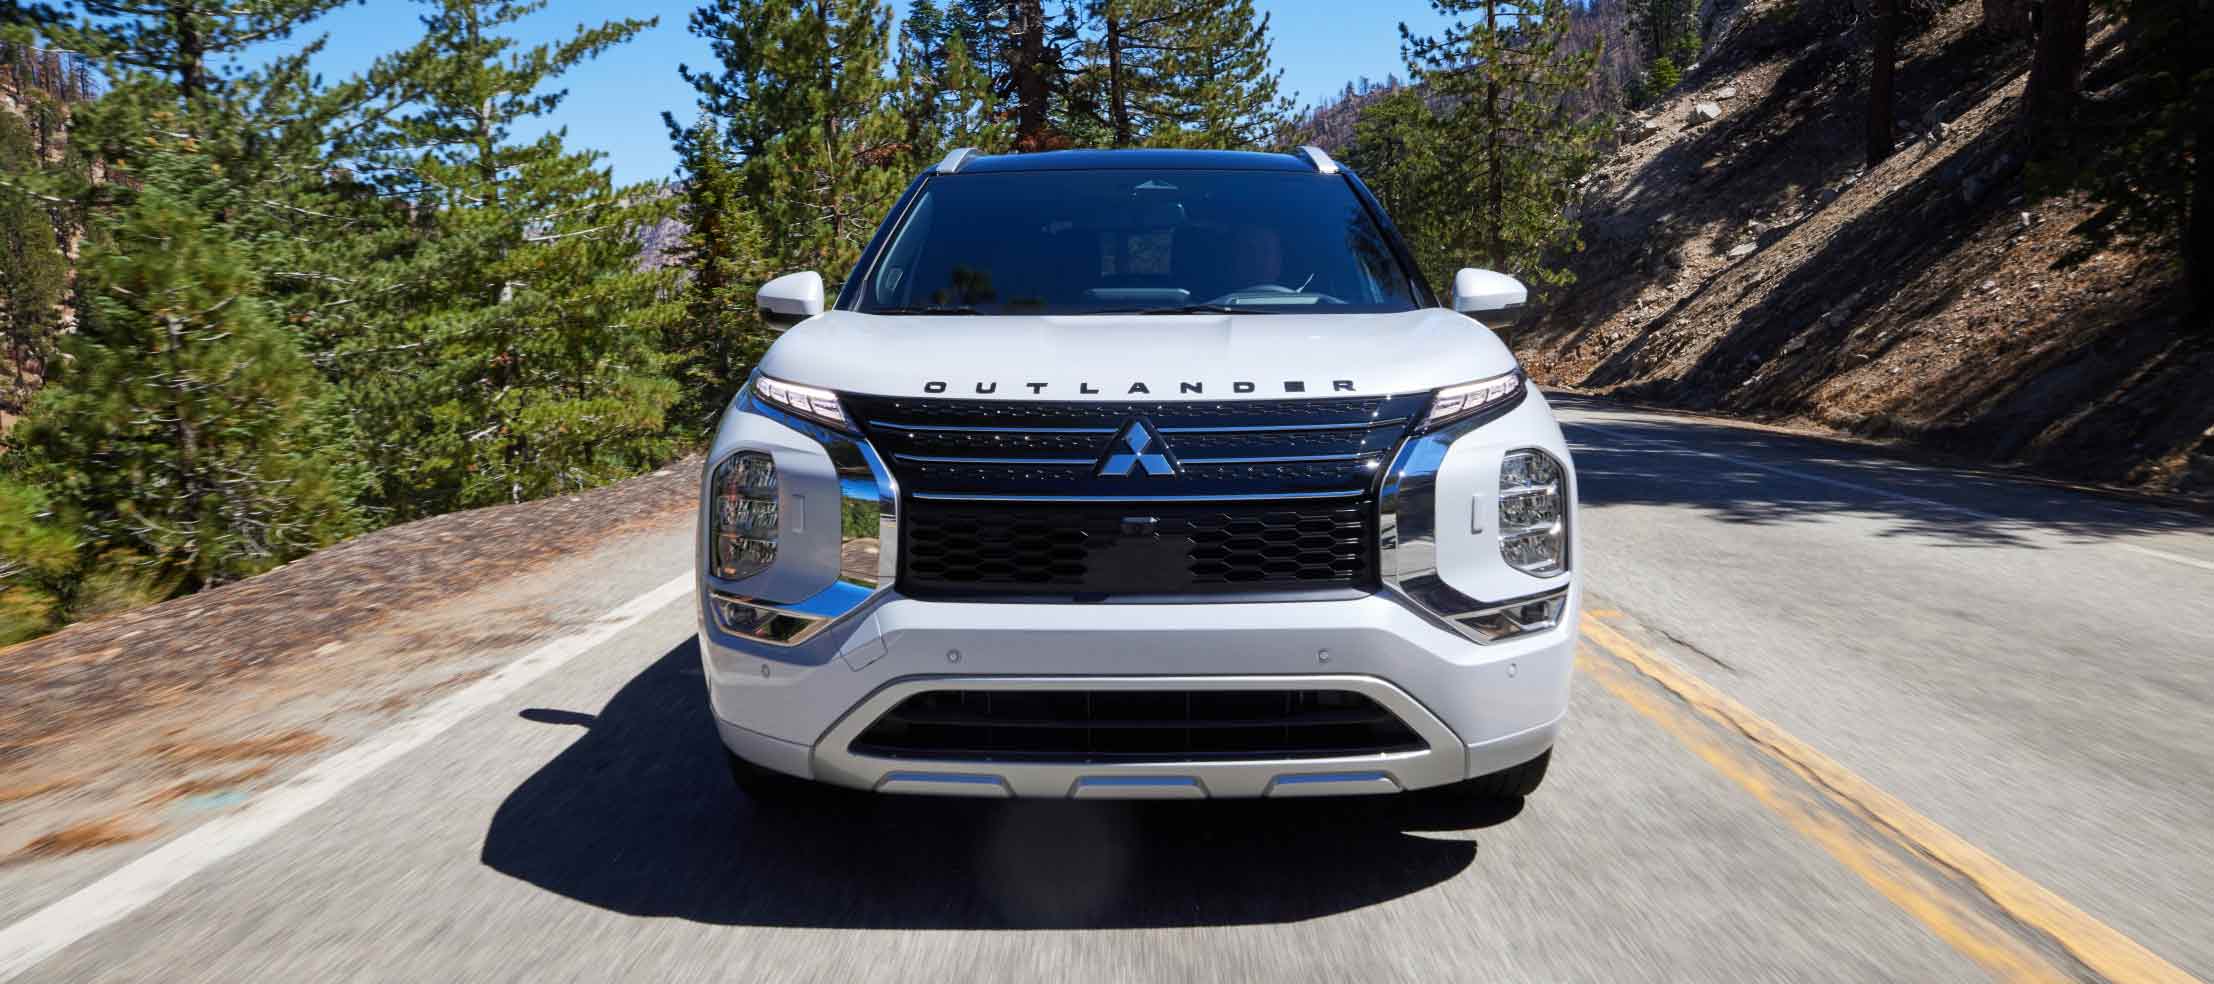 Front view of a white 2023 Mitsubishi Outlander PHEV SUV driving on a mountain road